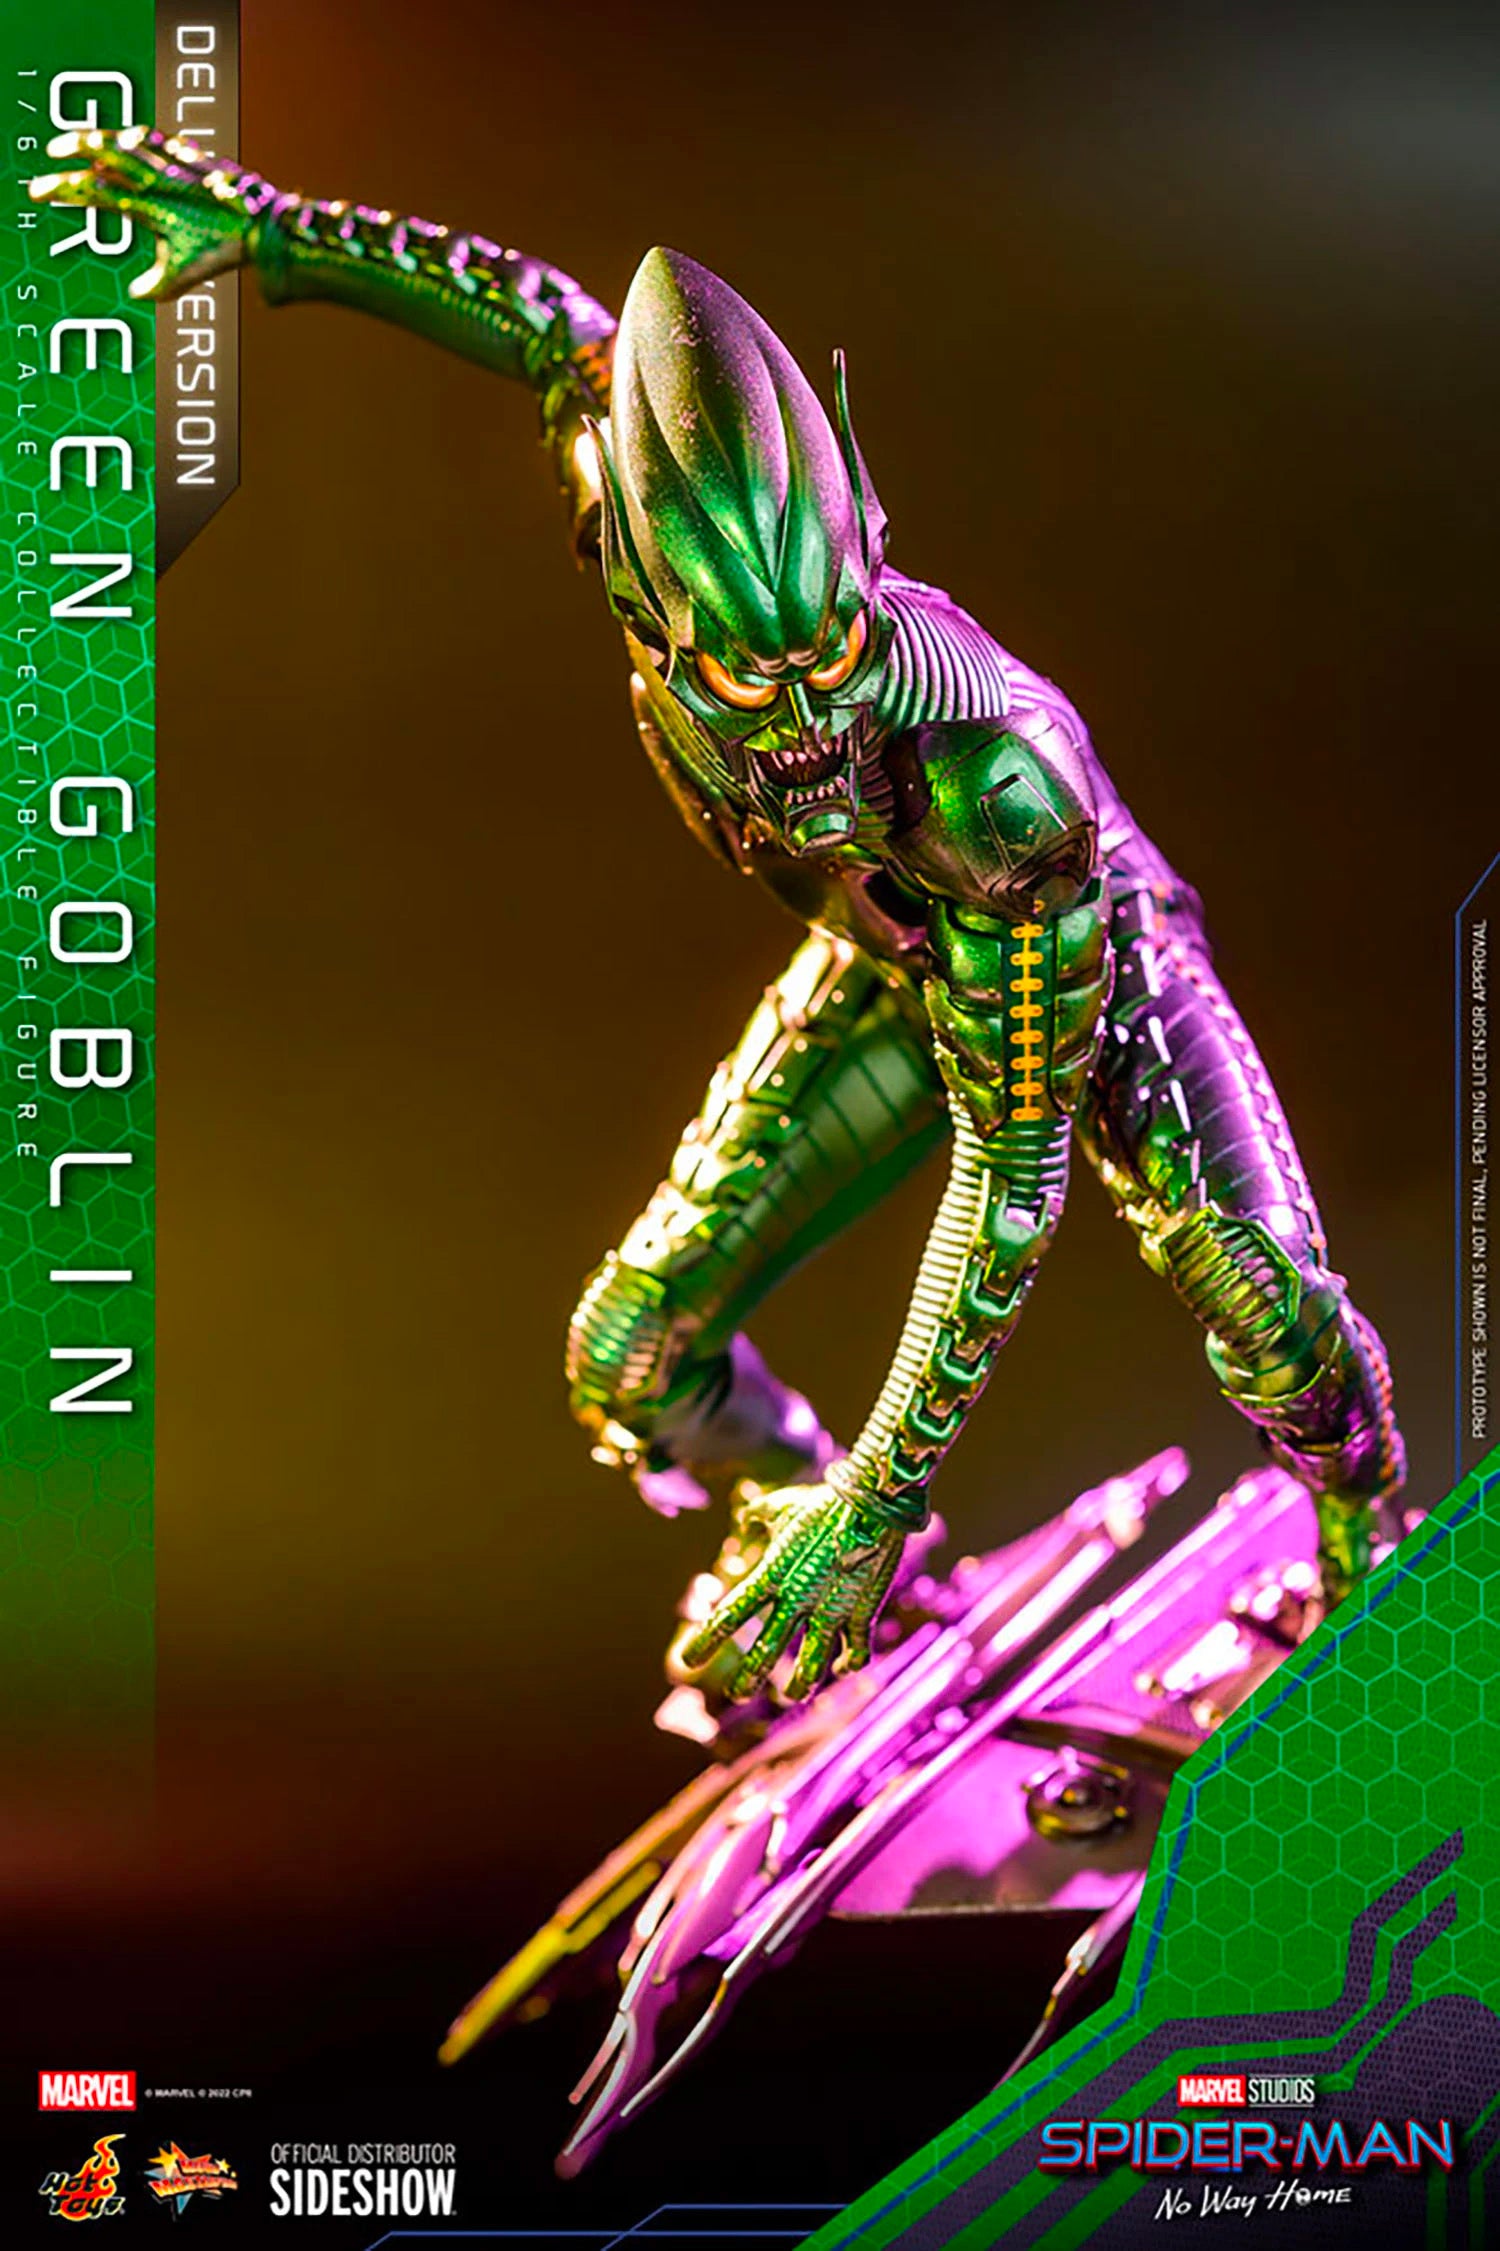 Green Goblin Sixth Scale Collectible Figure by Hot Toys